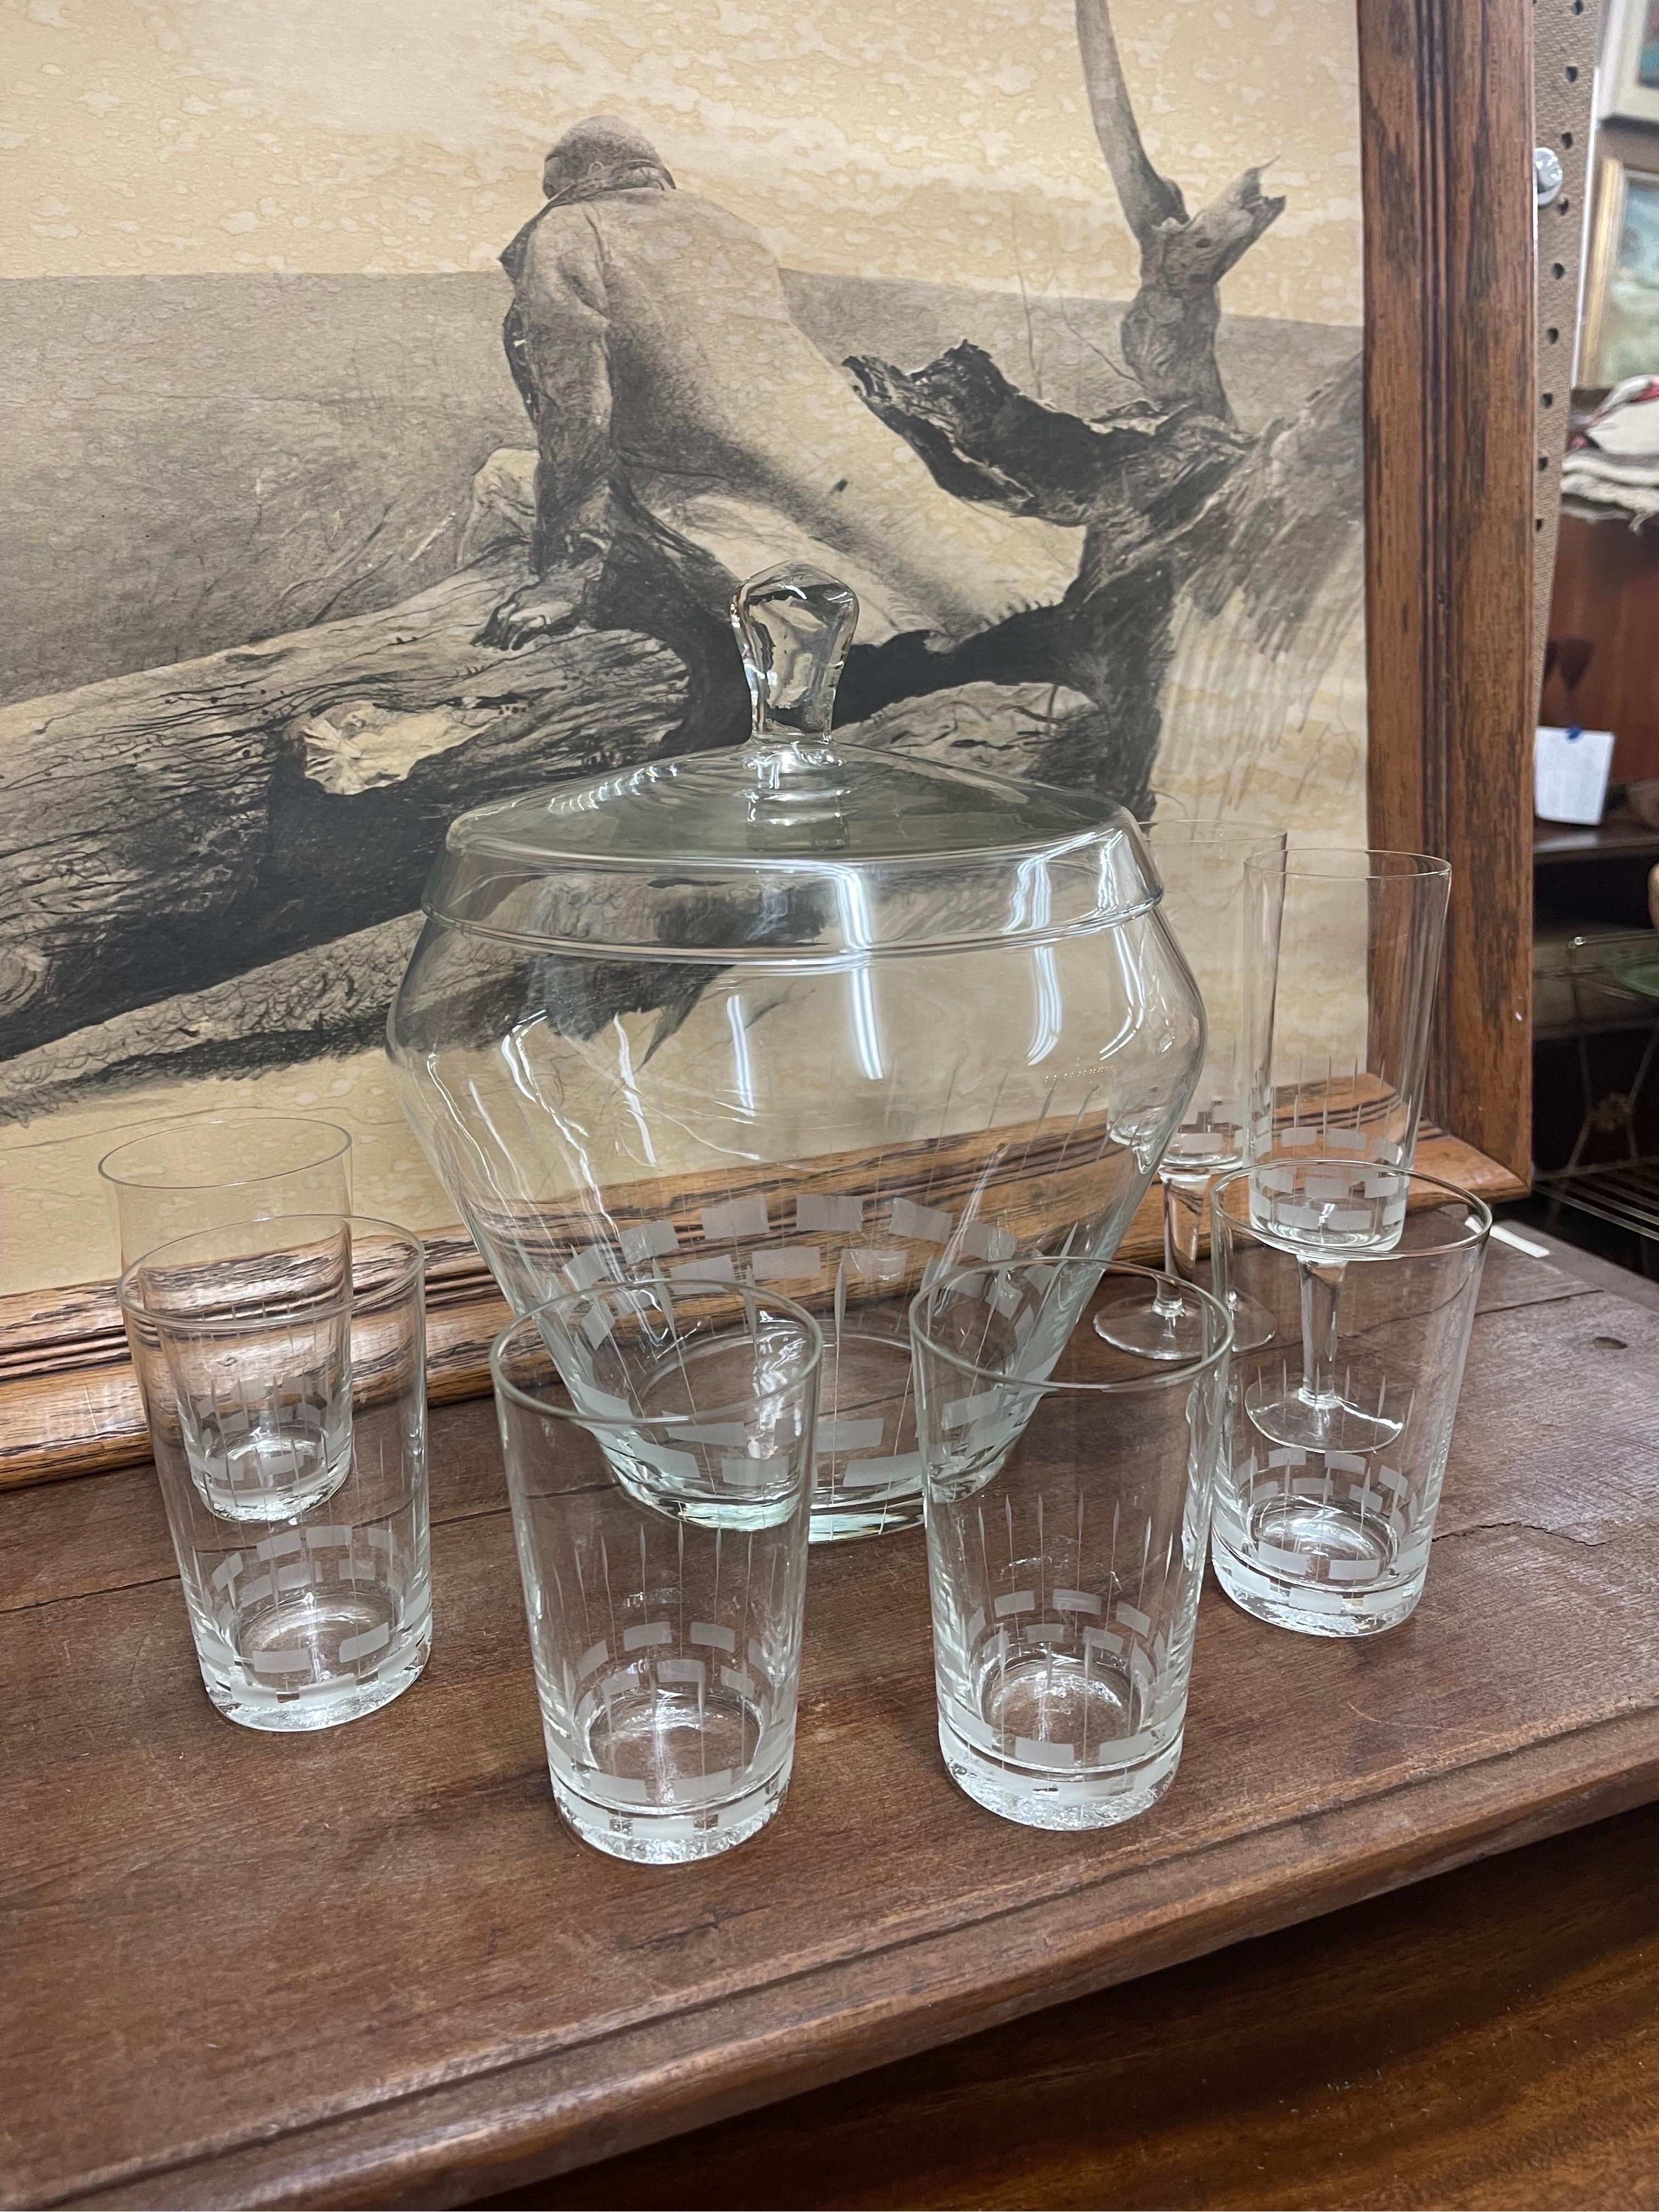 Circa 1960s- 1970s. This Drink ware set is most Likely Crystal, with Mid Century Design. This Set Features 5 Glasses, 3 Stem Glasses, and a Large Bowl with a Lid. Vintage Condition Consistent with Age as Pictured.

Dimensions. Small Glasses. 3 D ; 4